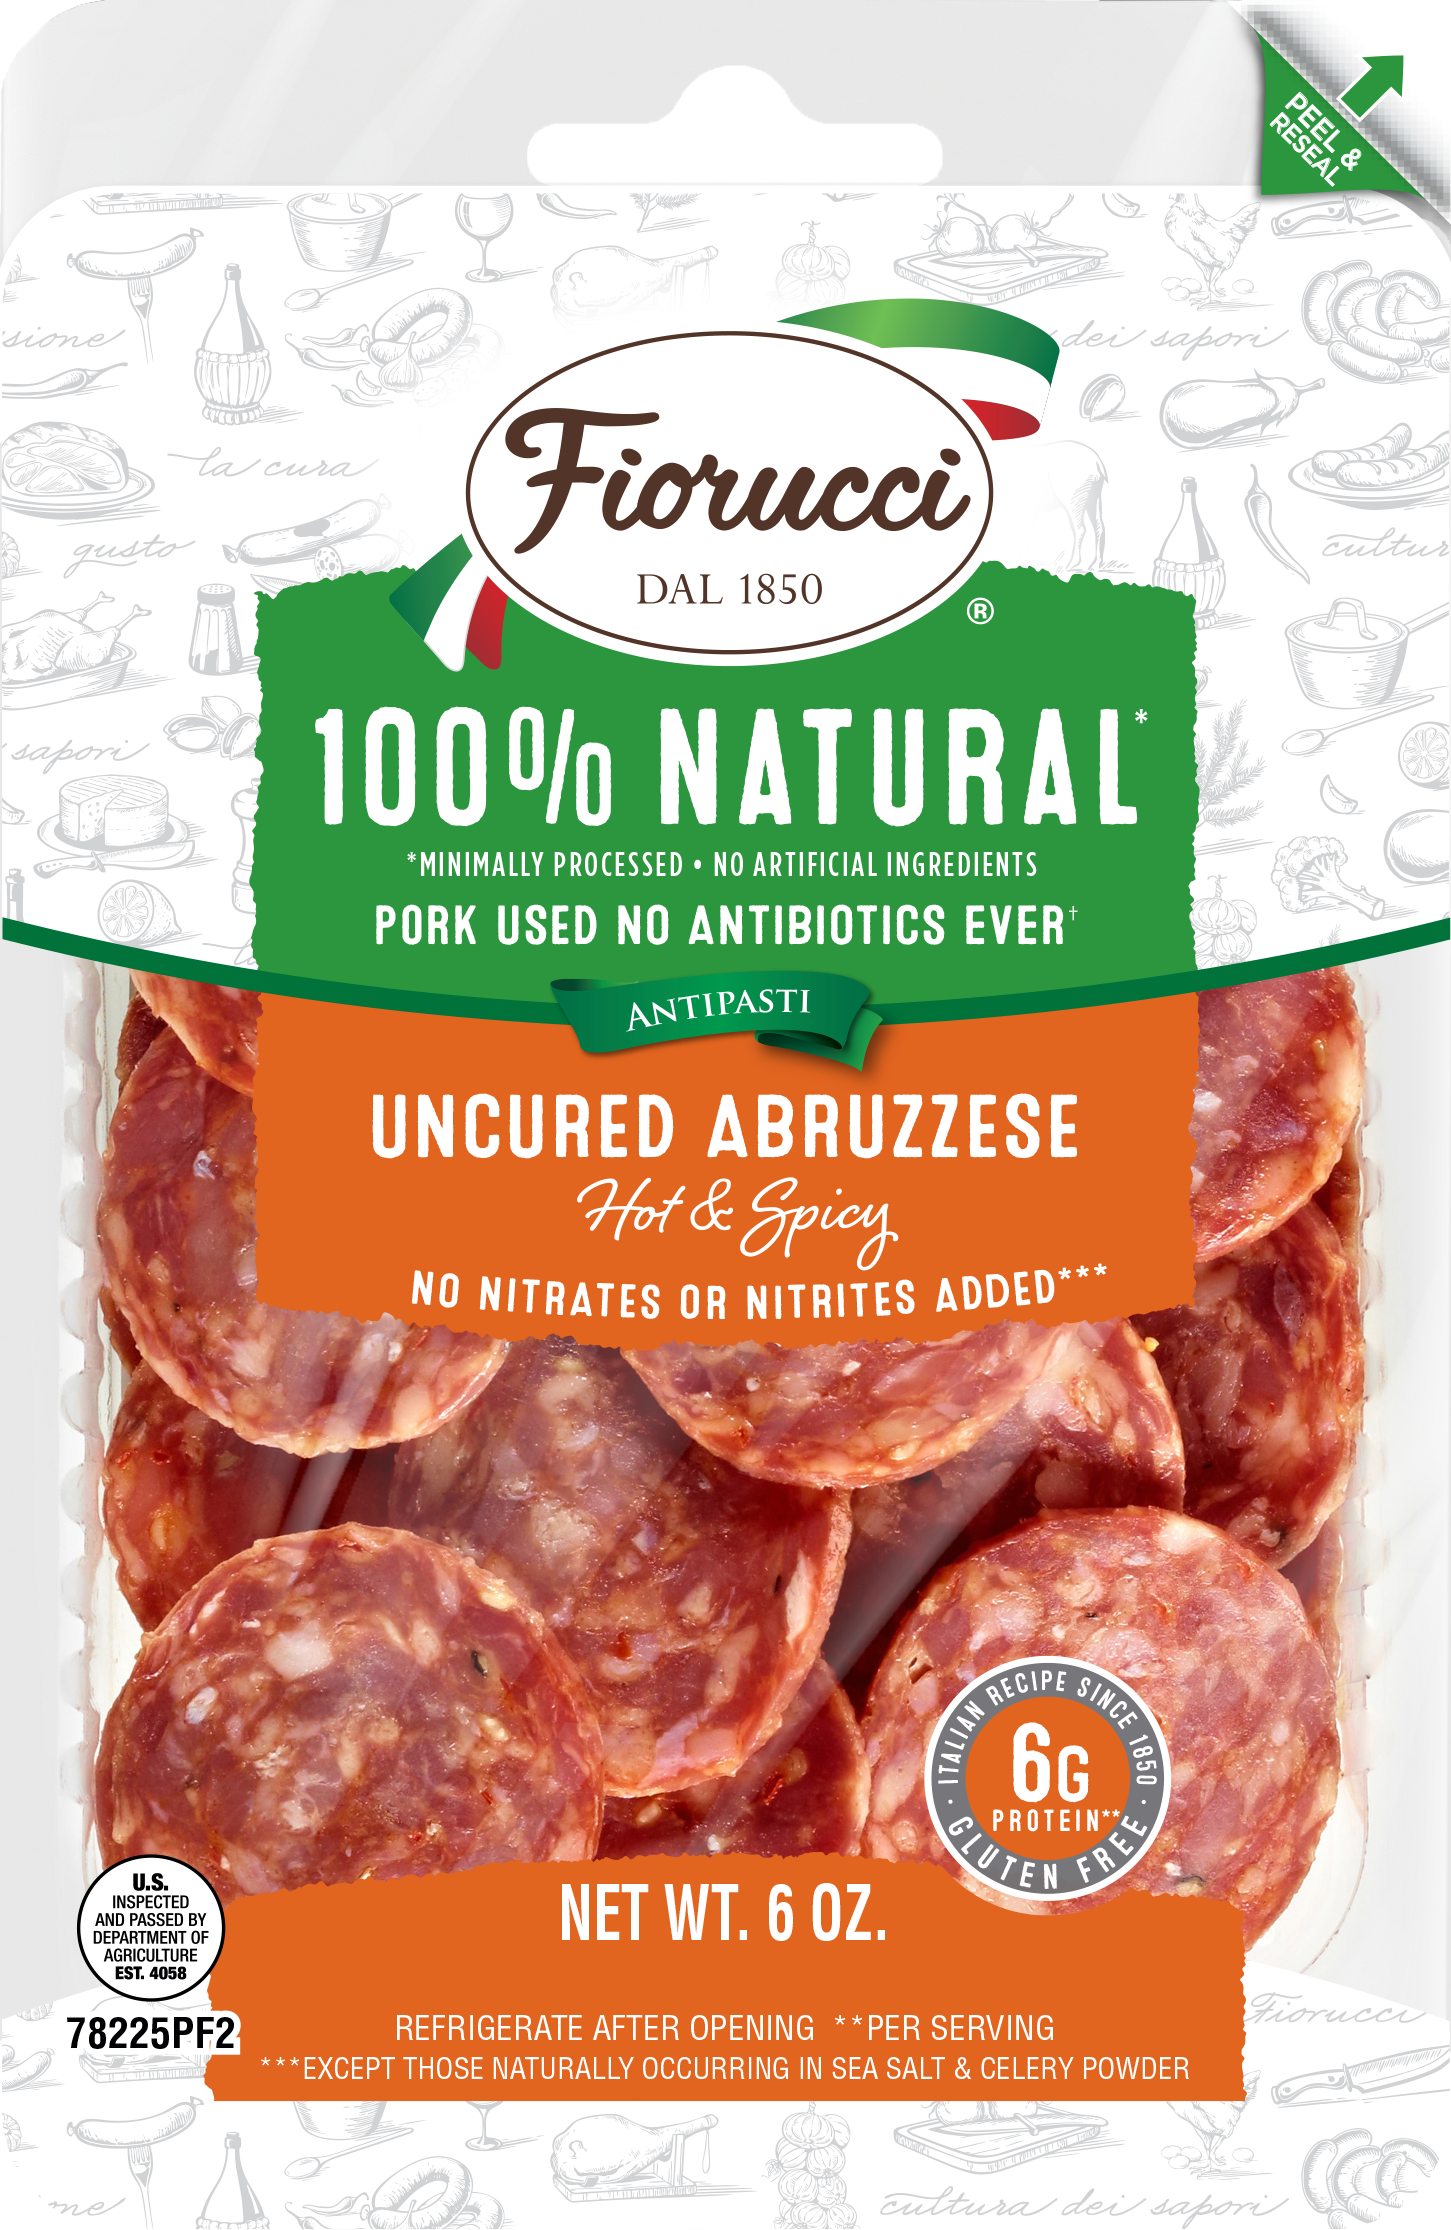 ALL NATURAL ABRUZZESE SLICES